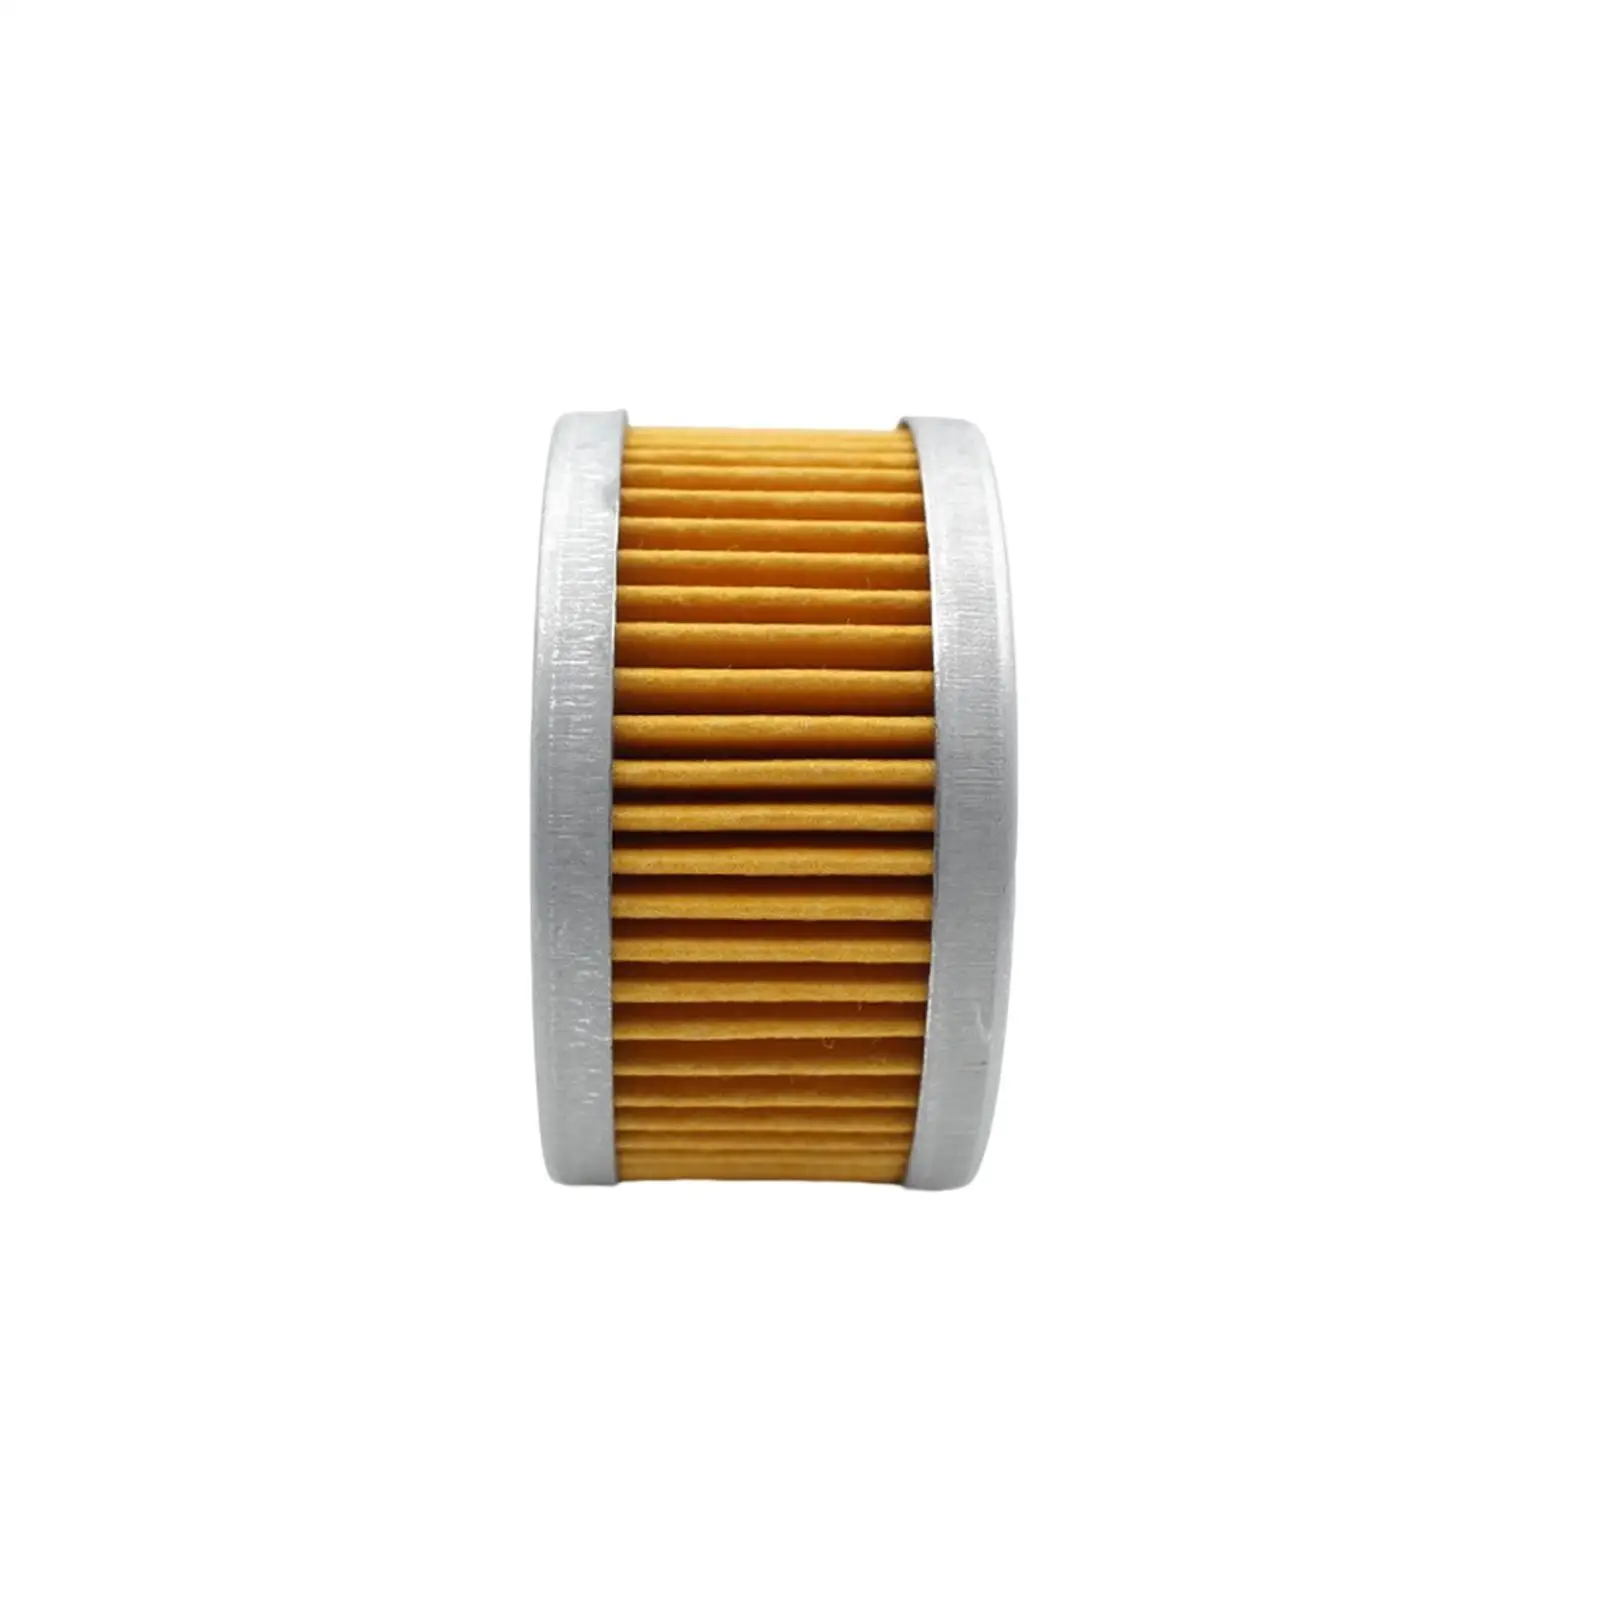 Engine Oil Filter High Performance Yellow forZ250 Gn250 DR350